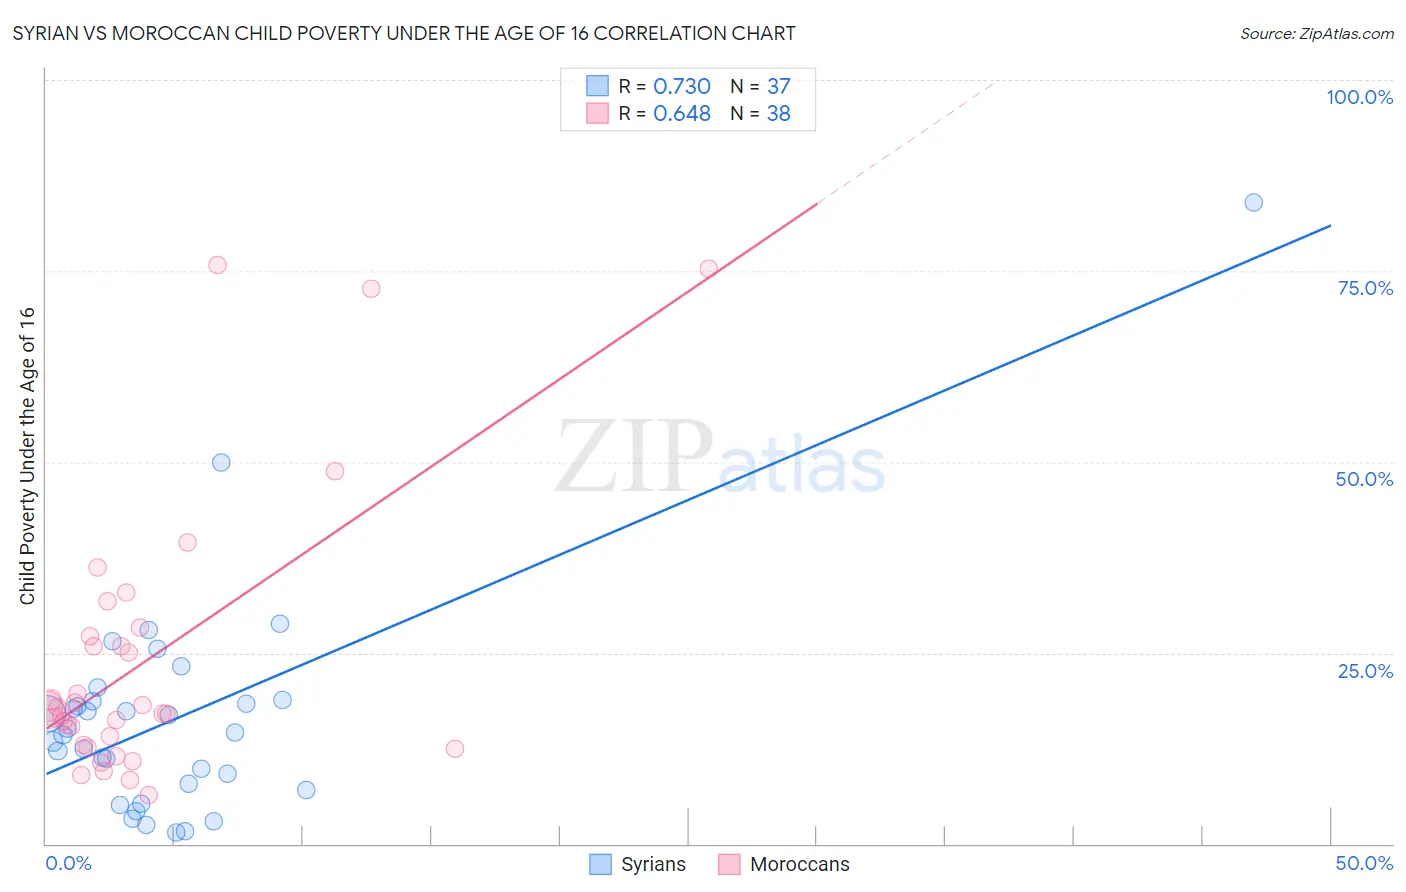 Syrian vs Moroccan Child Poverty Under the Age of 16